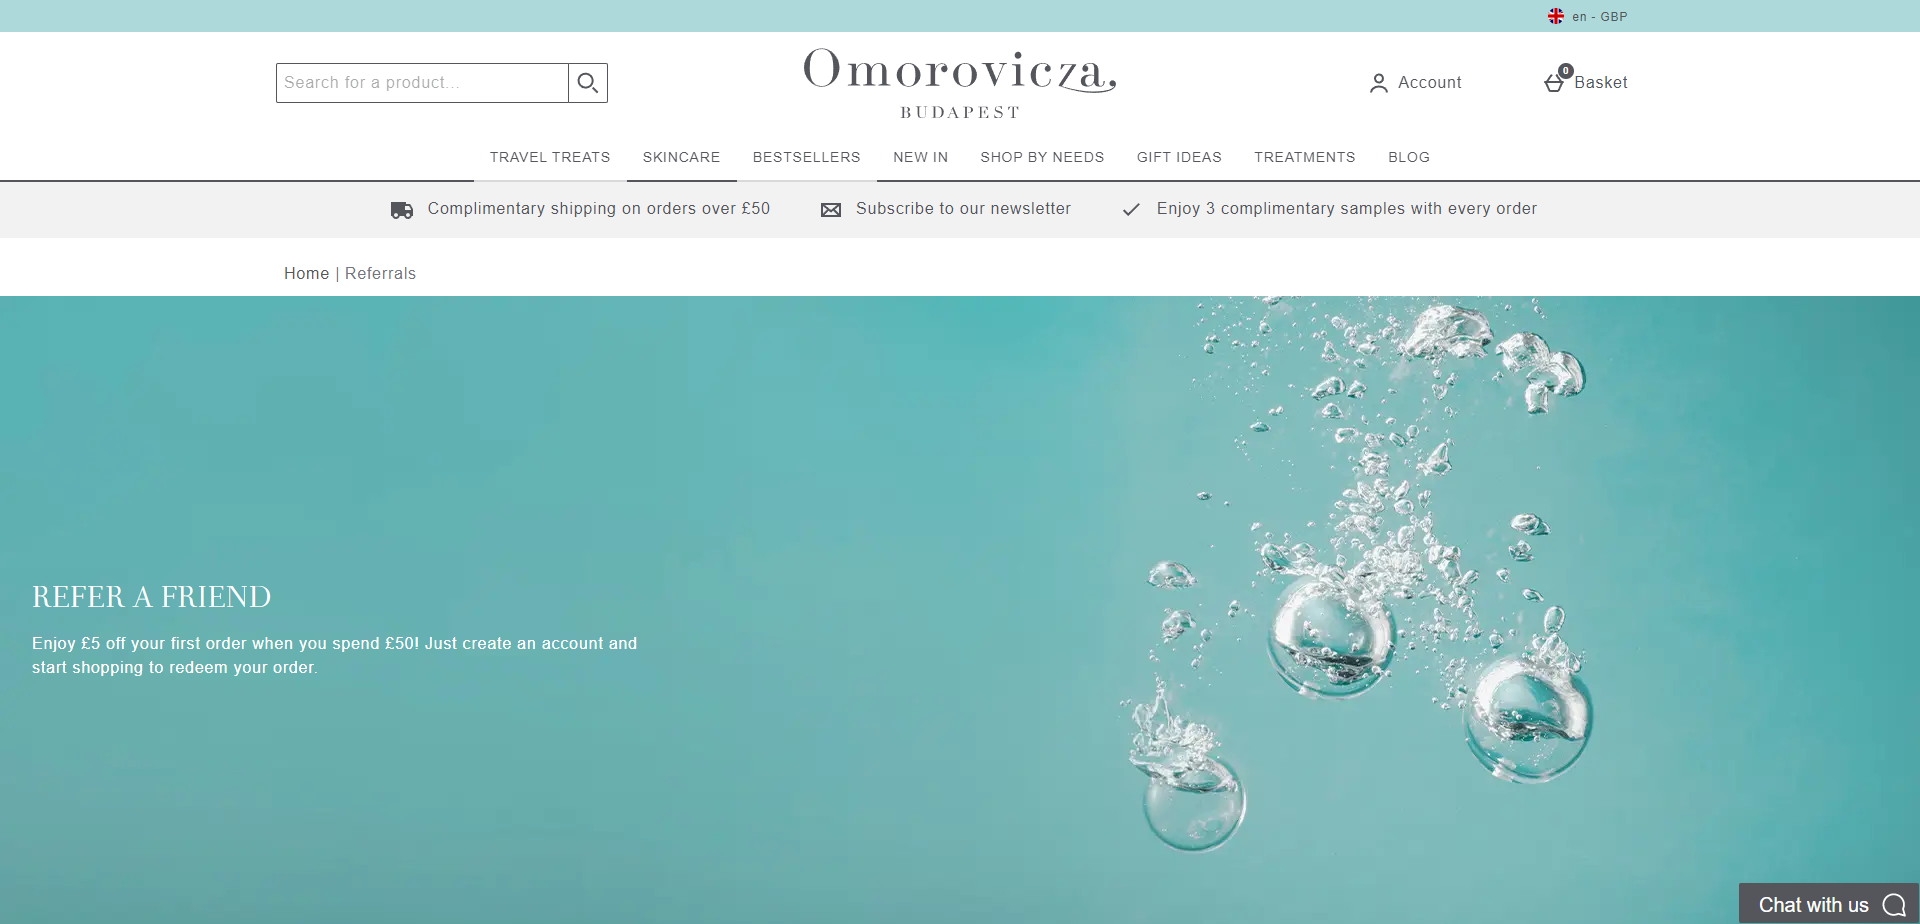 Landing Page for Omorovicza